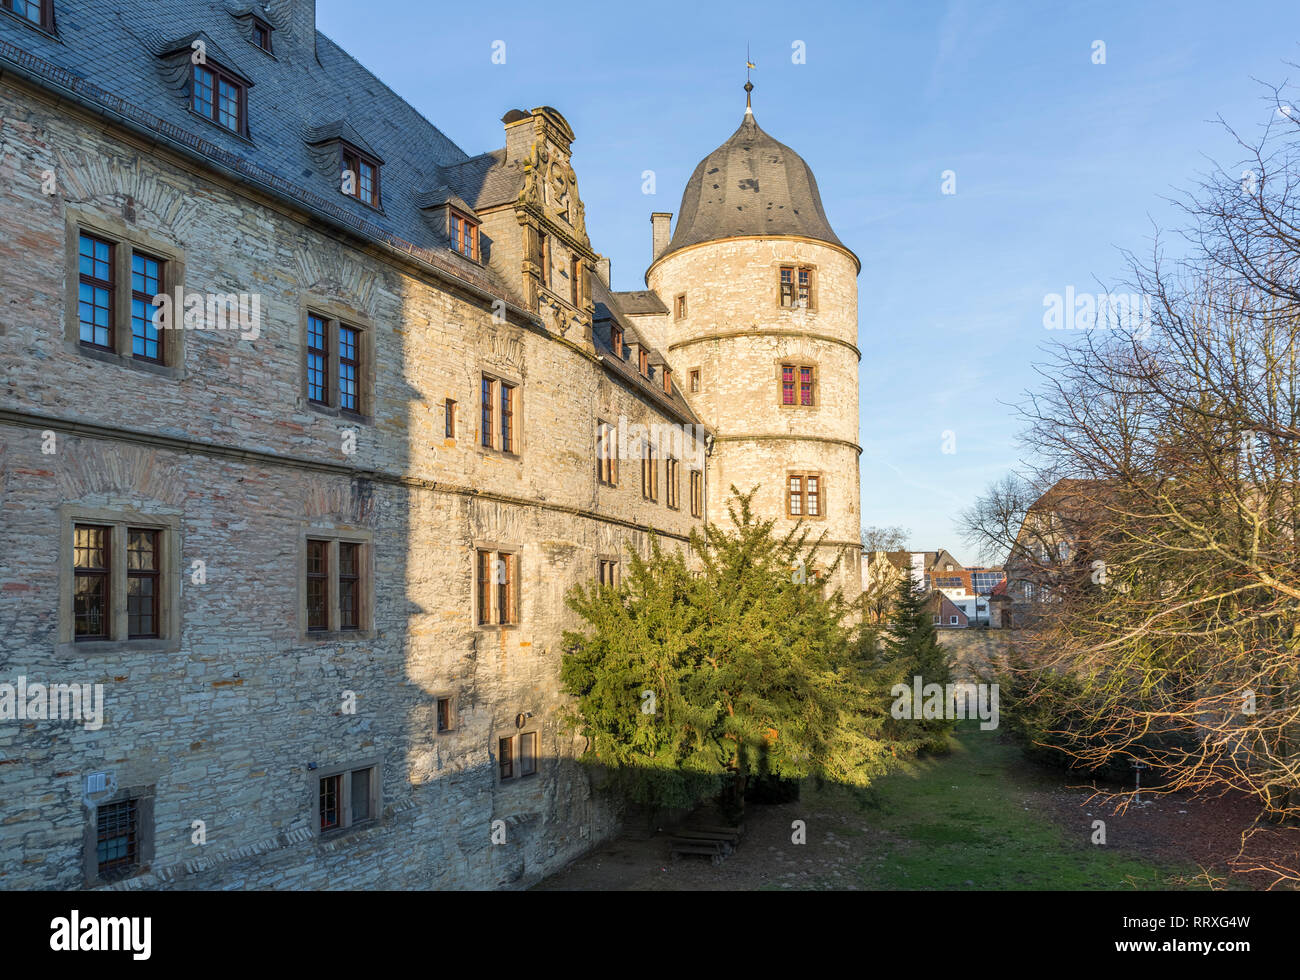 A Renaissance Wewelsburg castle famous as the central SS and Heinrich Himmler cult-site, Germany Stock Photo